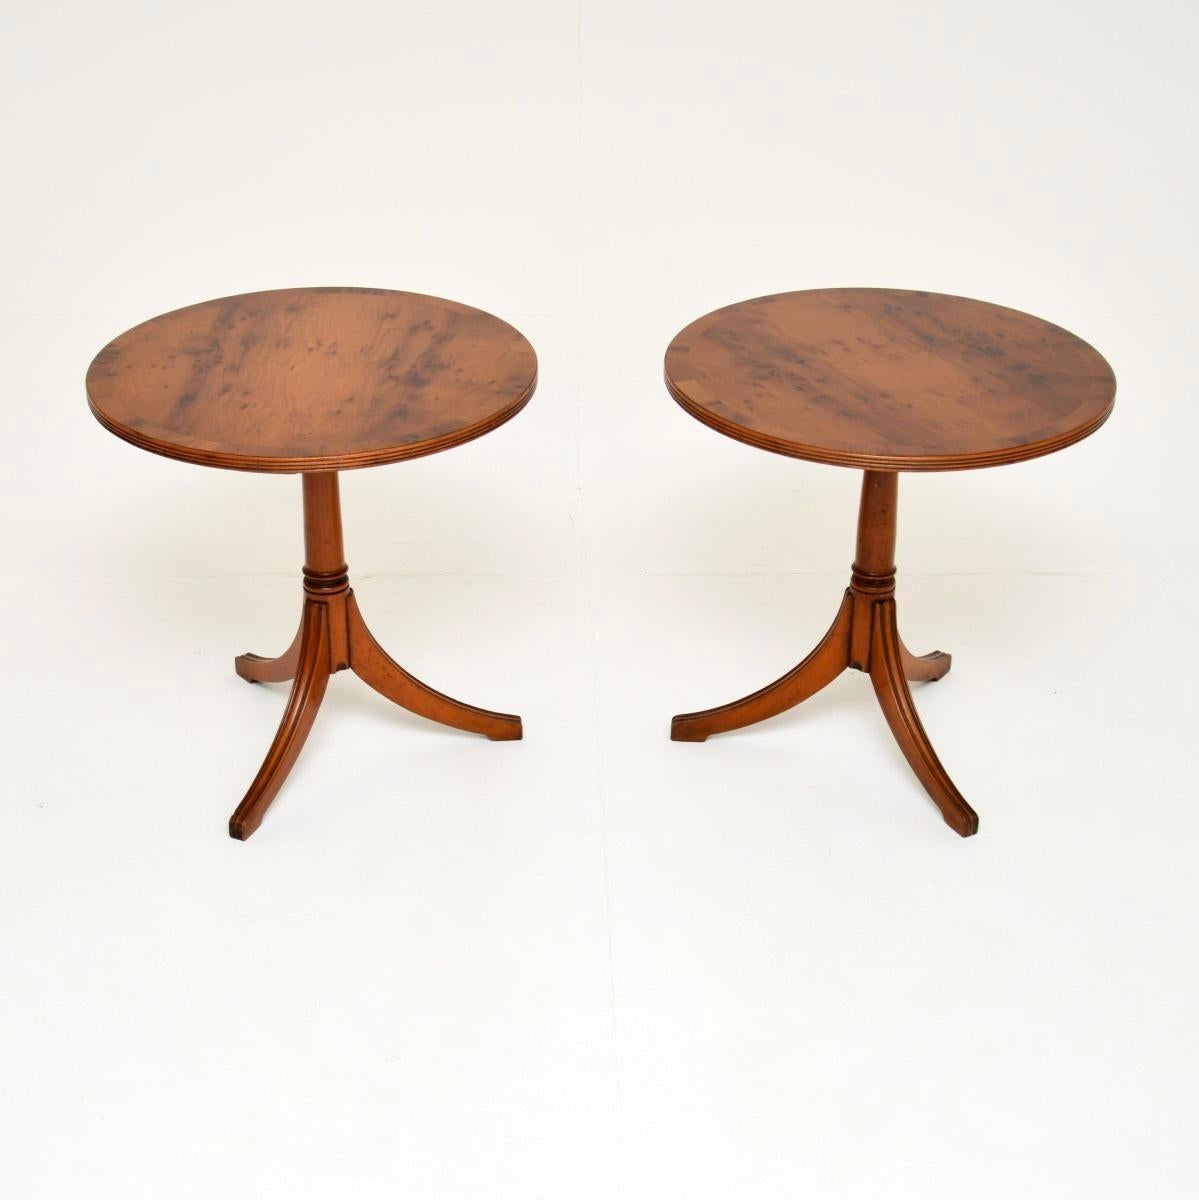 A smart and beautifully designed pair of antique Regency style yew wood side tables. They were made in England, they date from around the 1950’s.

The quality is fantastic and they are a very useful size. The circular tops have cross banded edges